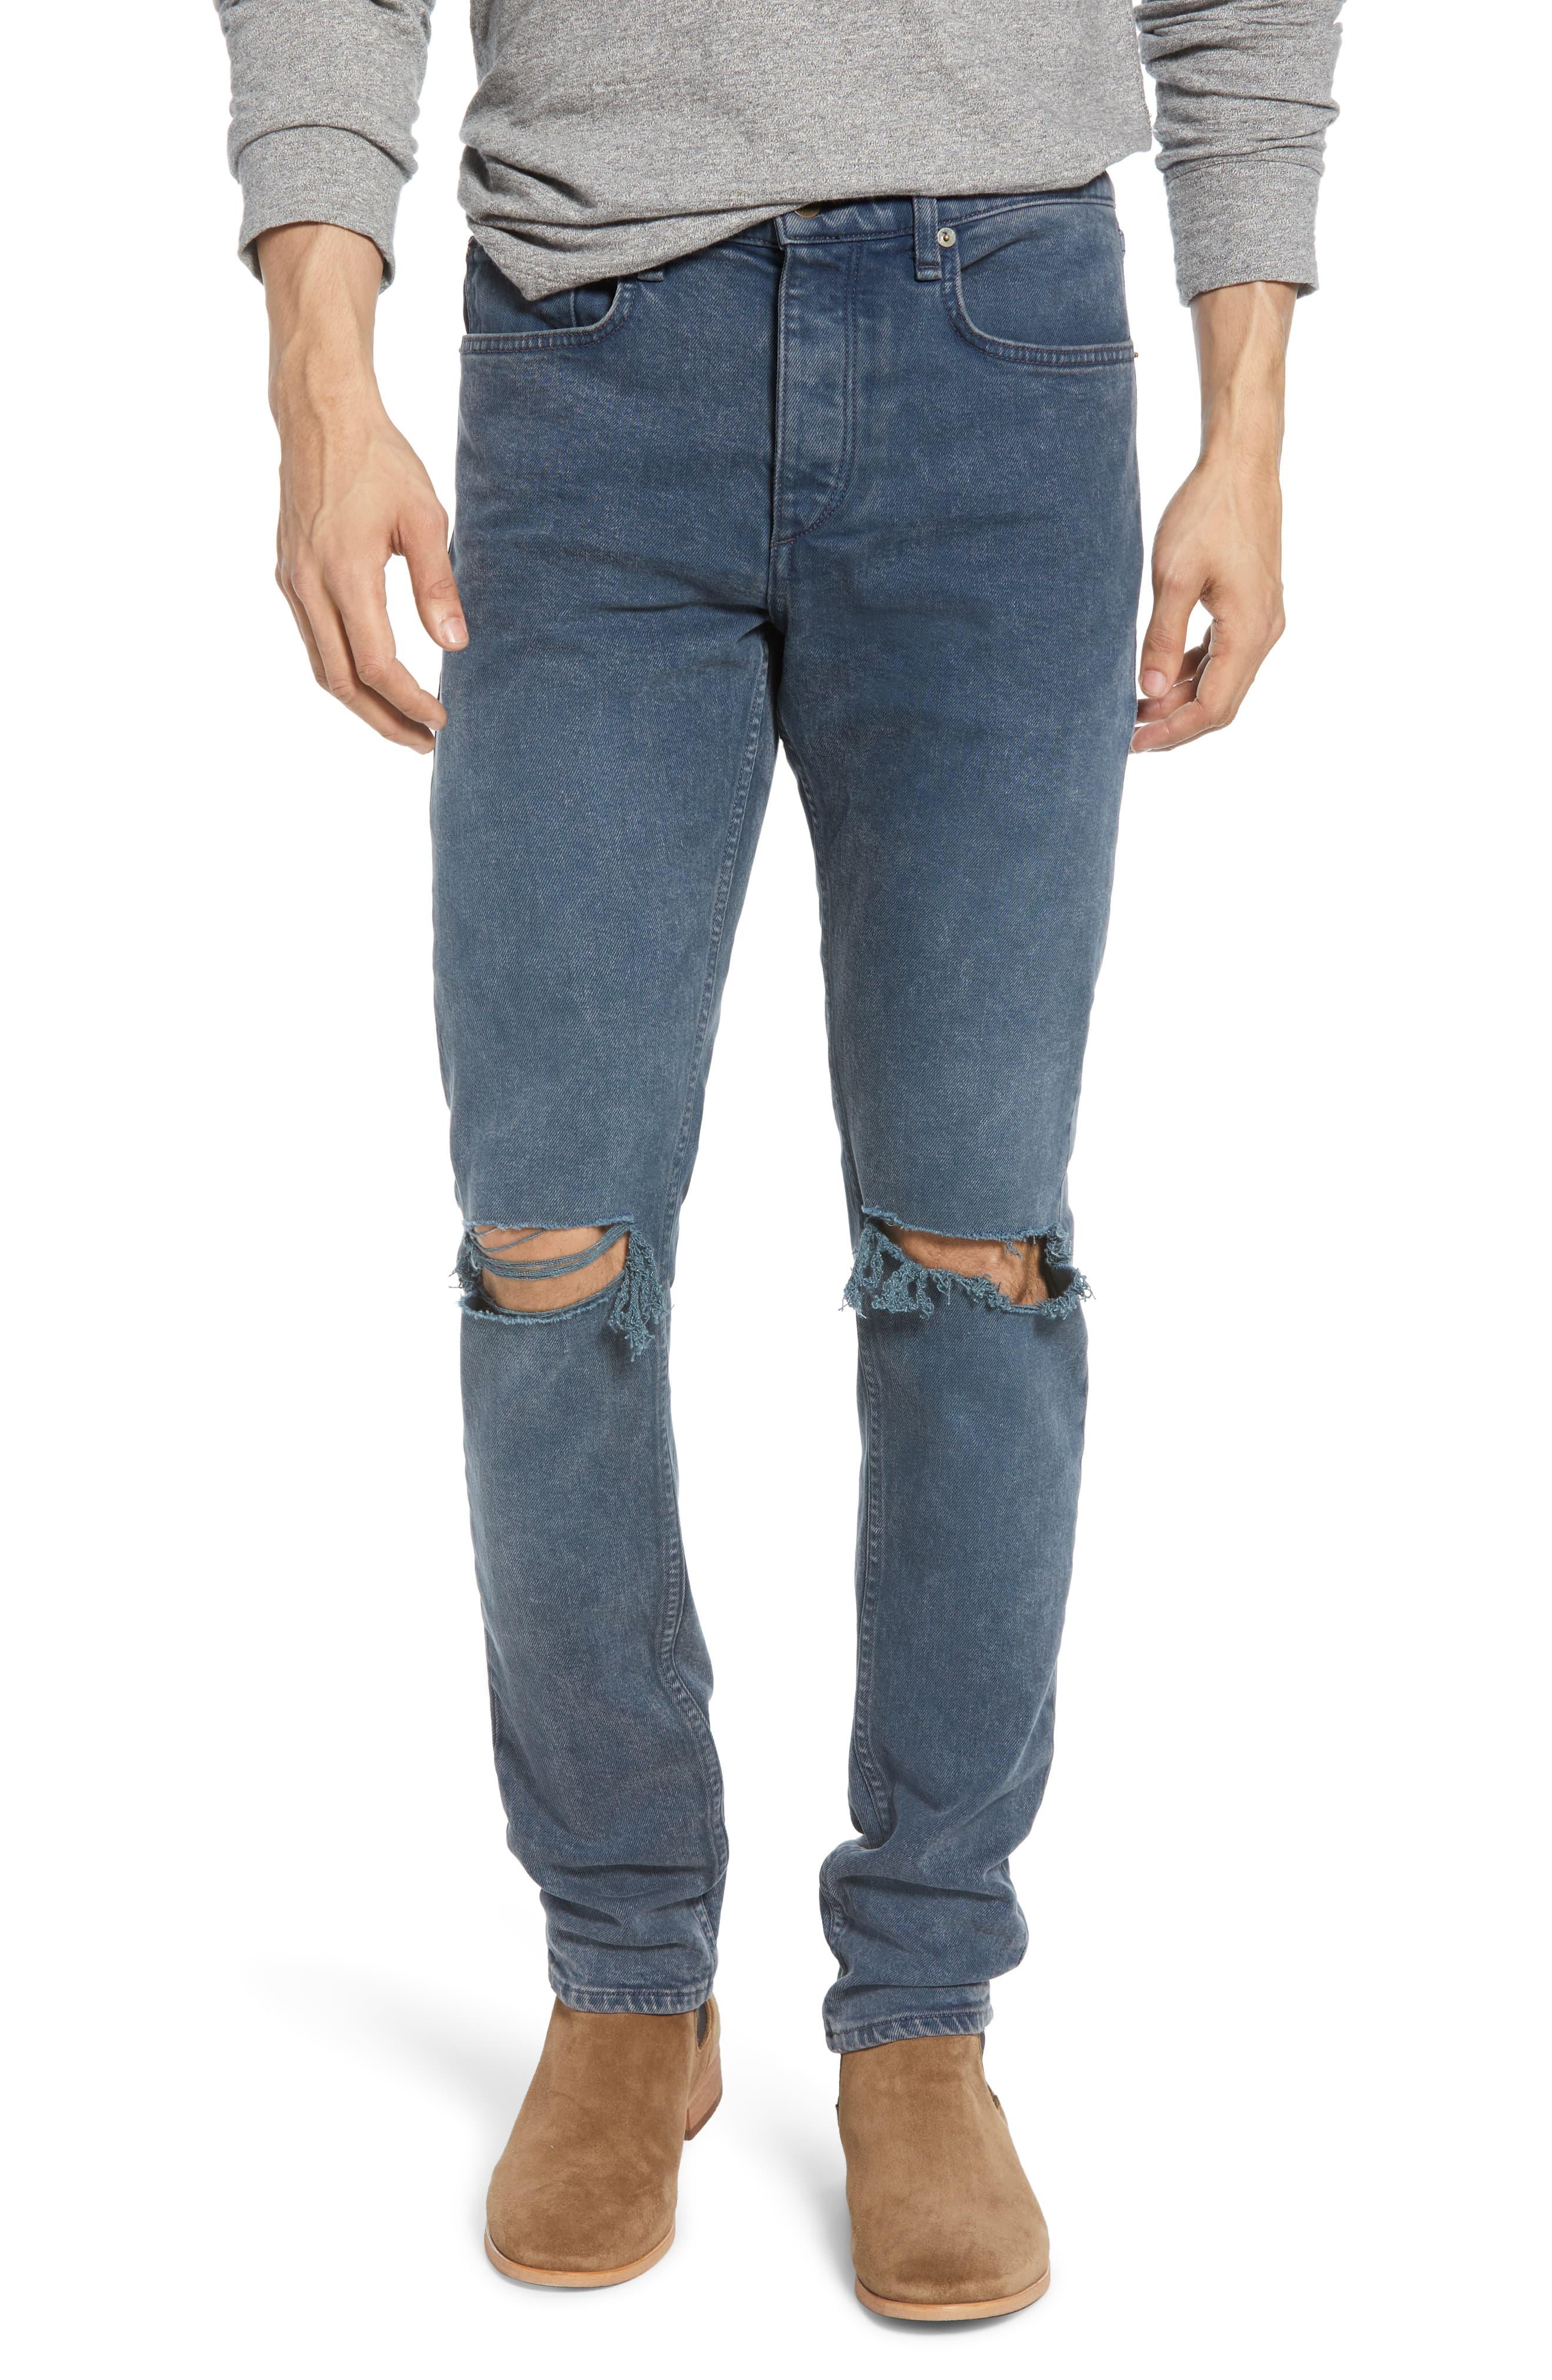 Rag & Bone Fit 1 Ripped Skinny Fit Jeans in Blue for Men - Lyst